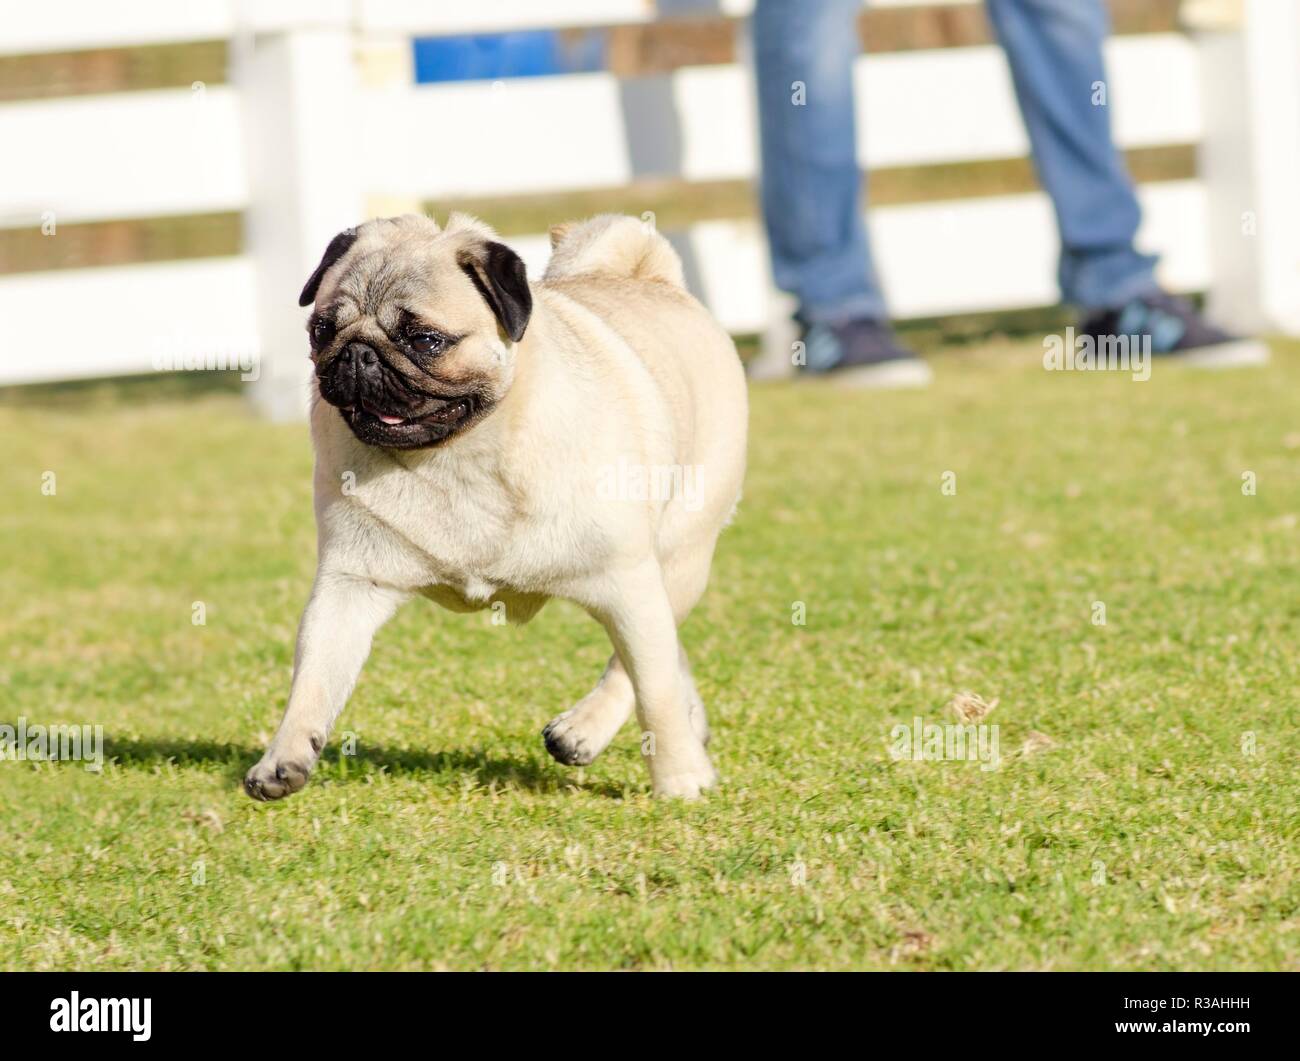 Walk With Mops Stock Photos & Walk With Mops Stock Images - Alamy